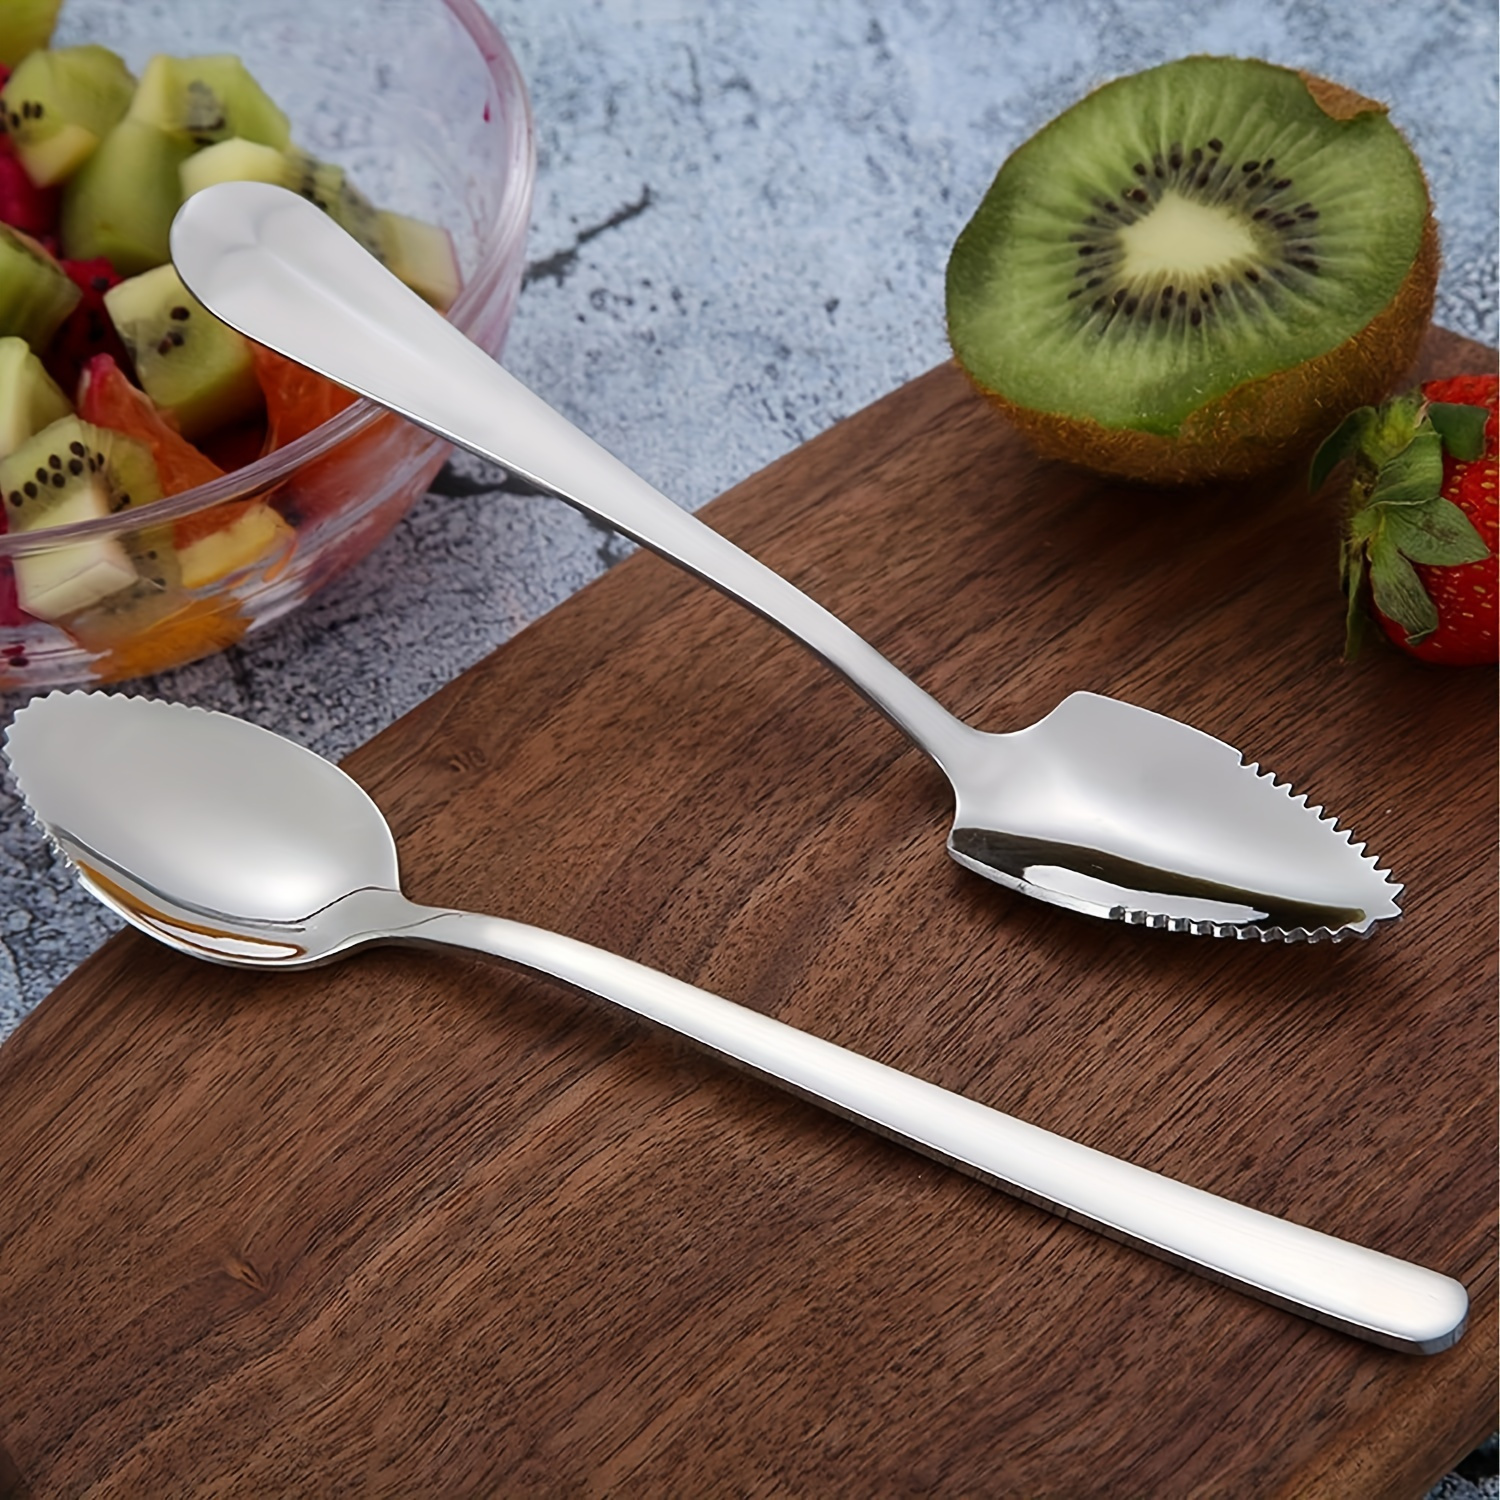 Portion Control Serving Spoon Kitchen Utensils For Portion Control Food  Safe 2pcs/set Portion Scoops Measuring Spoons Easy - AliExpress